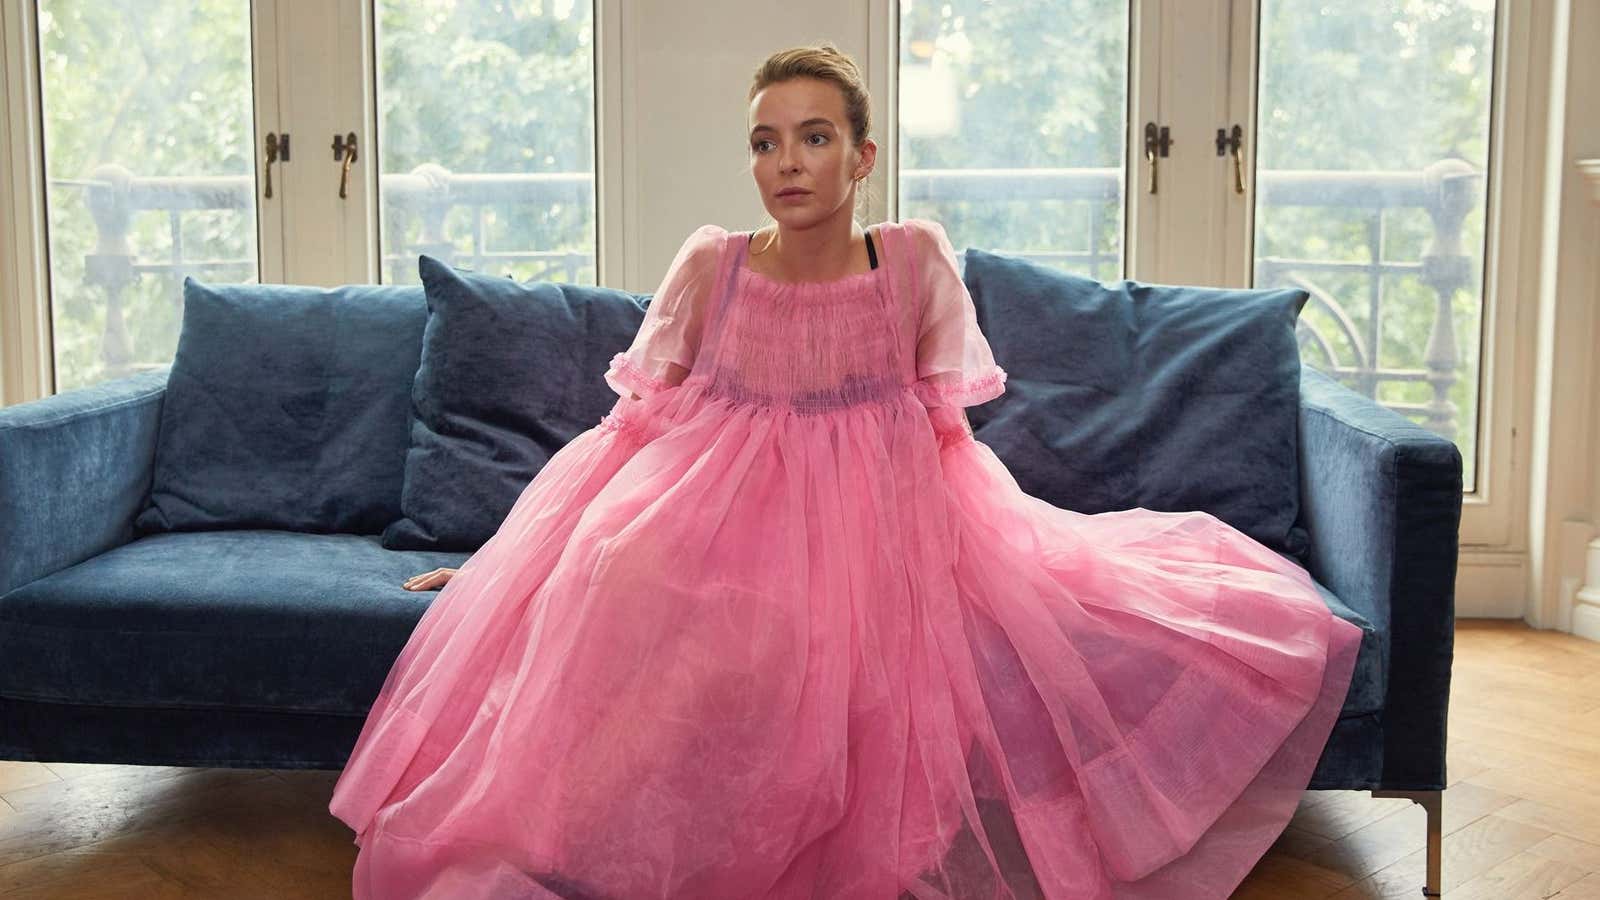 Jodie Comer is giving one of TV’s best performances.